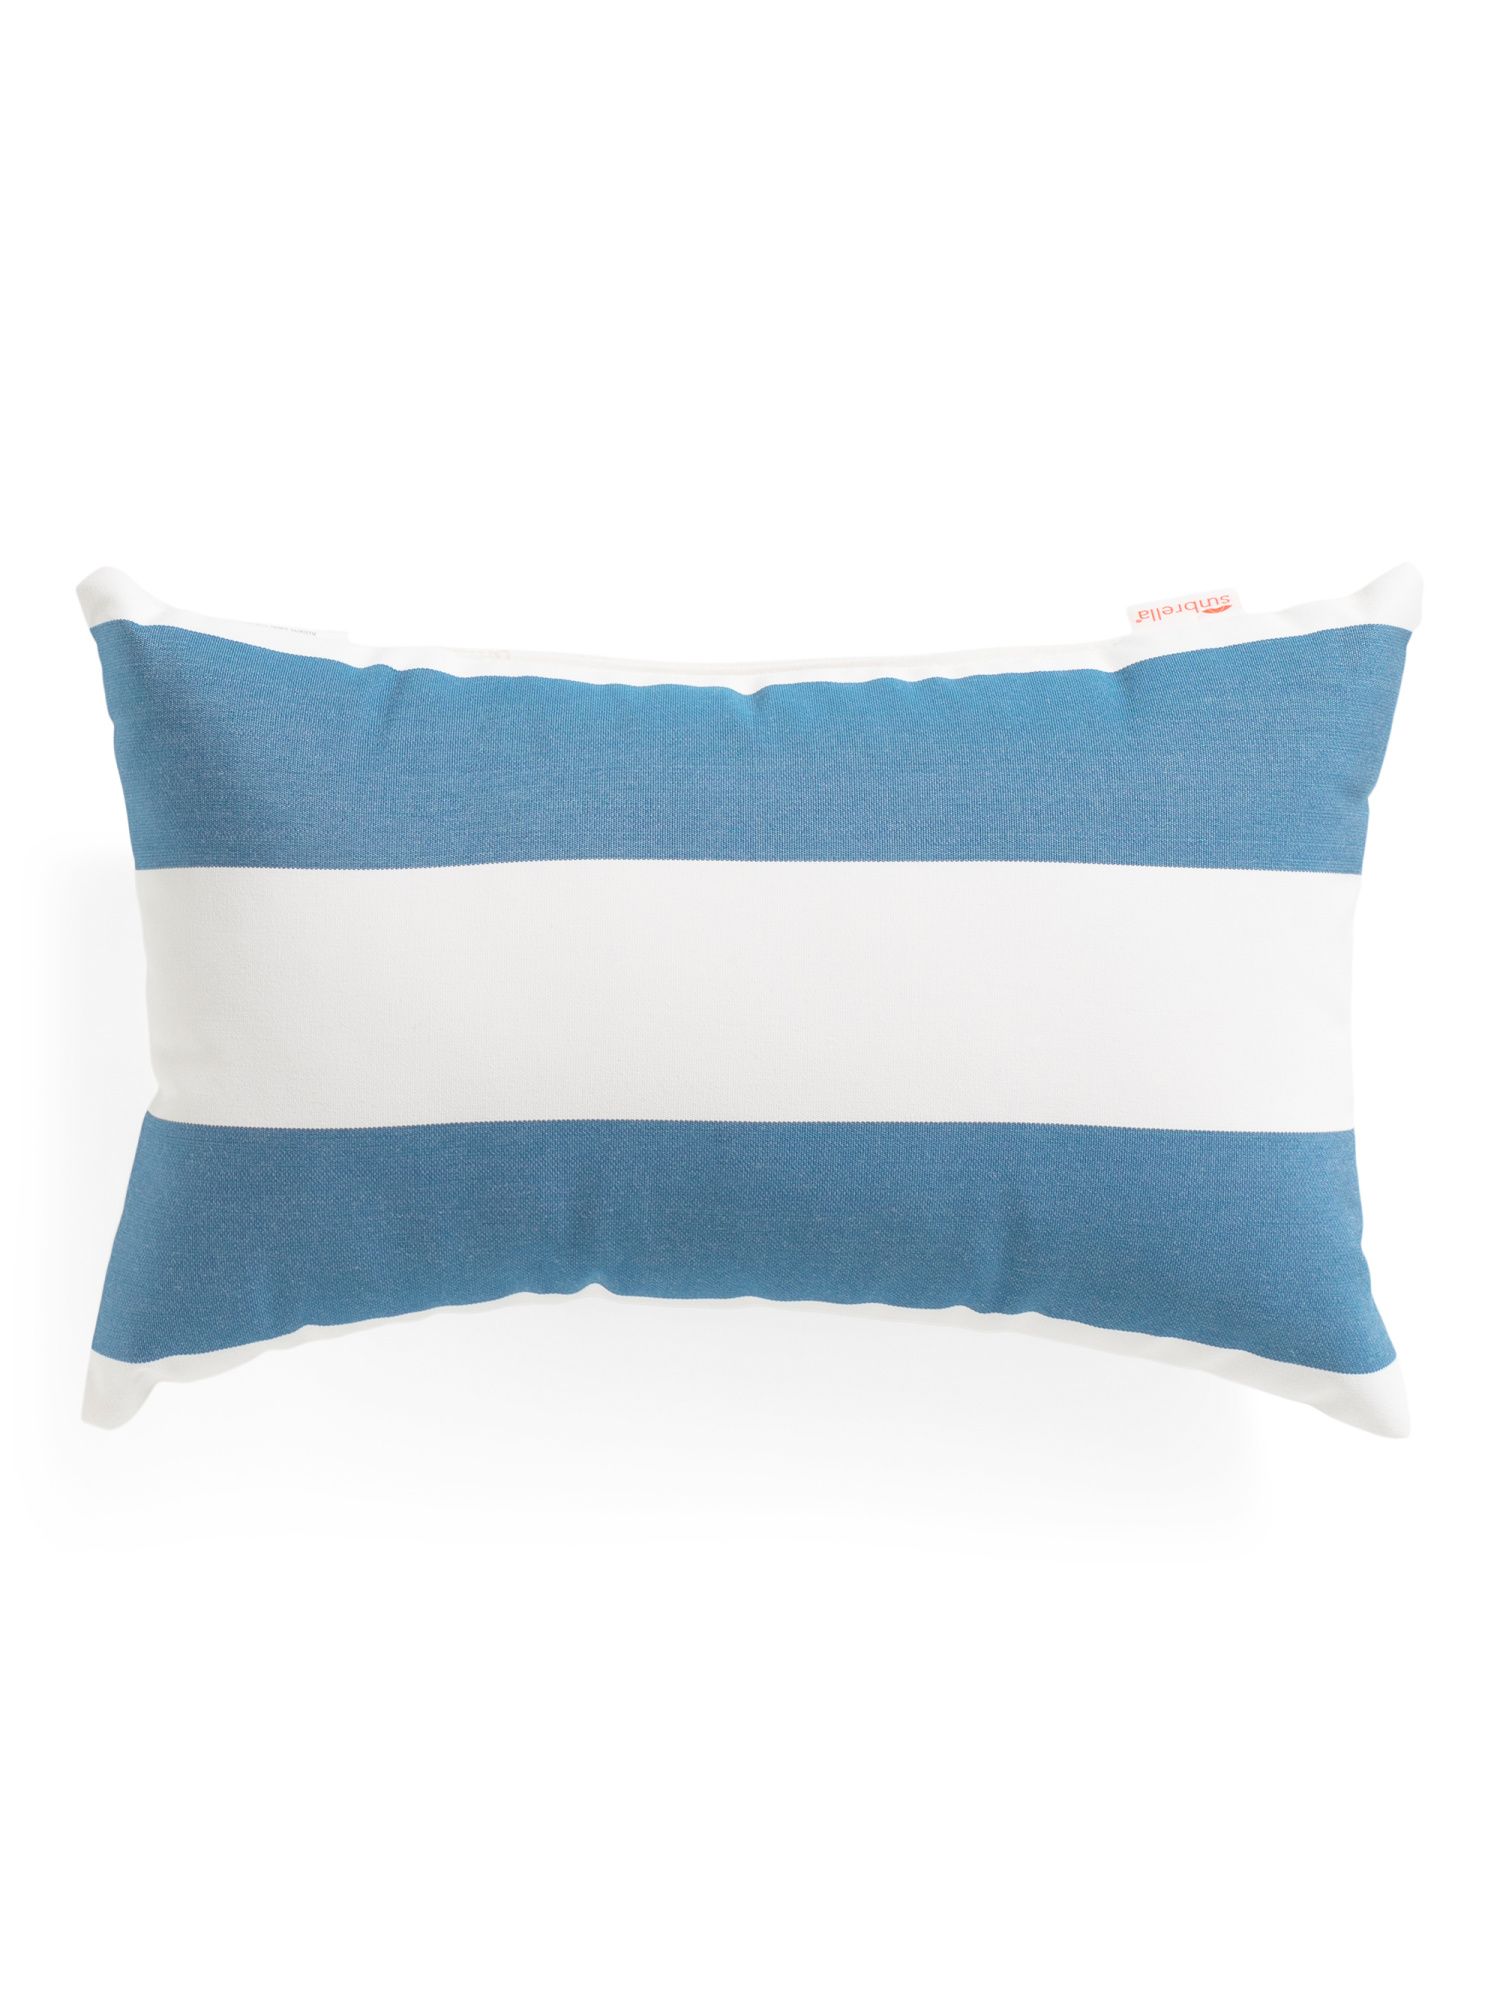 Made In Usa 13x20 Outdoor Striped Pillow | Marshalls